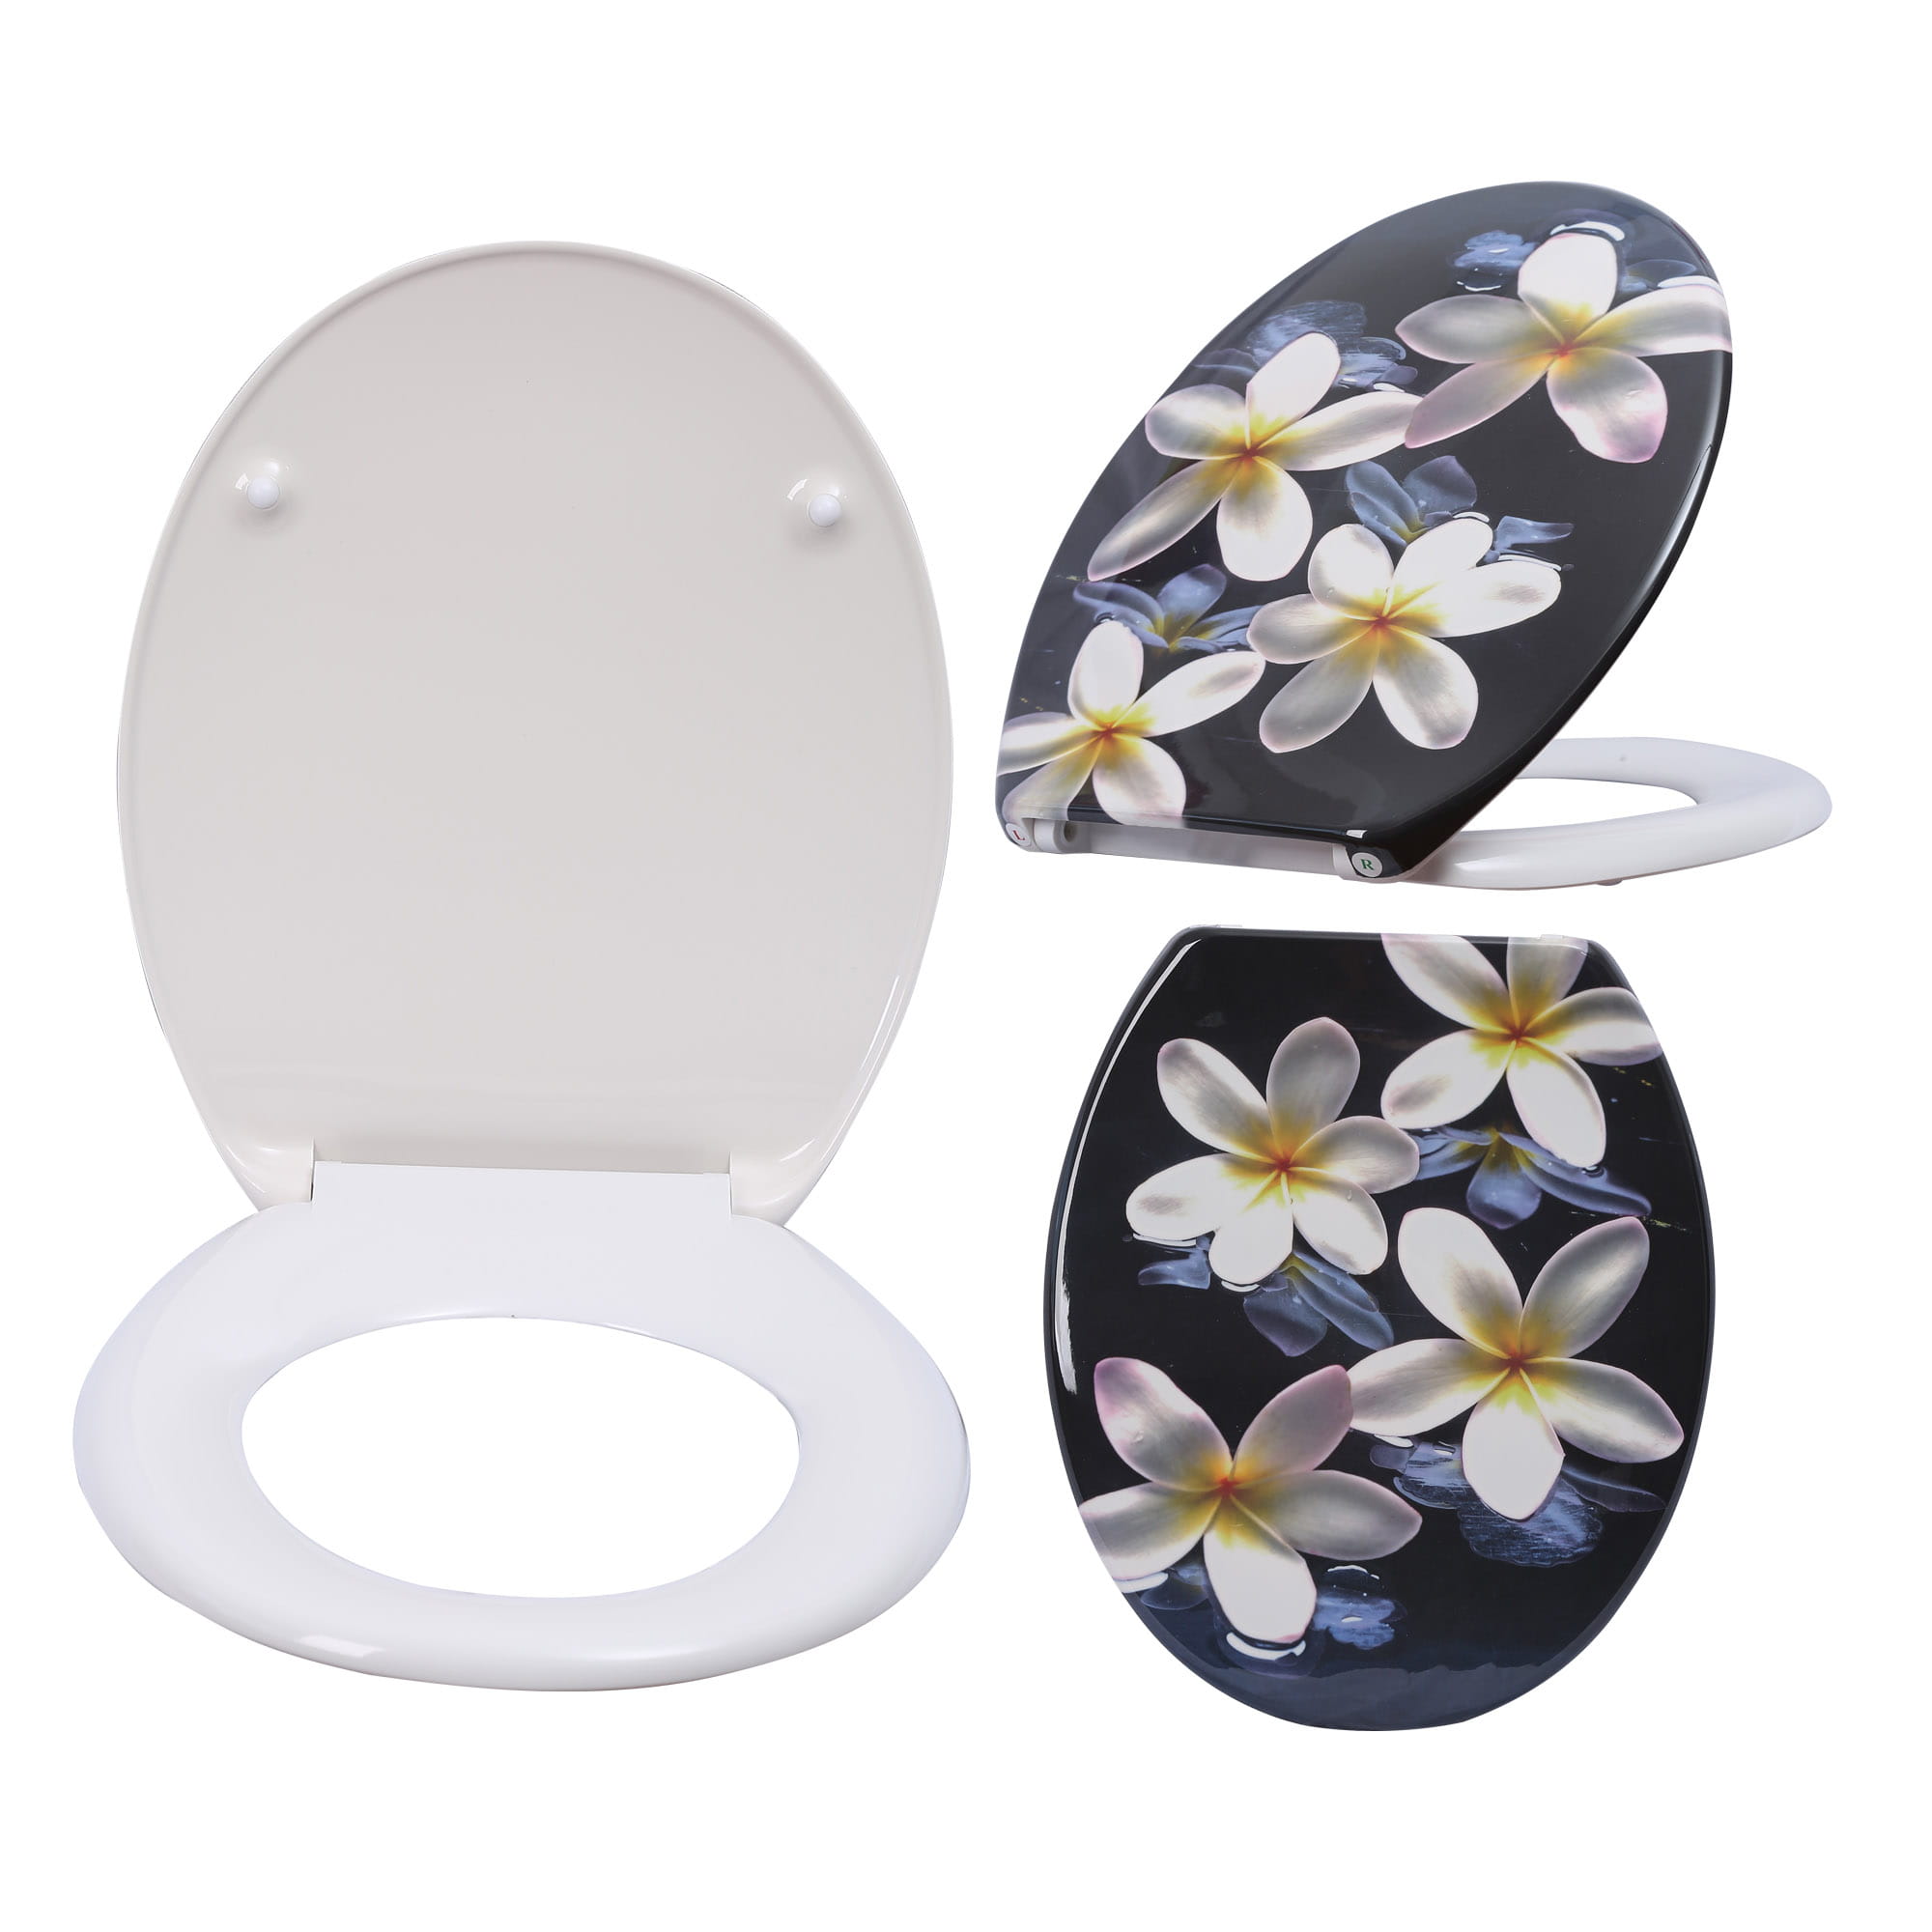 Evaluating The Noise Reduction Benefits of Soft Close Quick-Release Toilet Seats